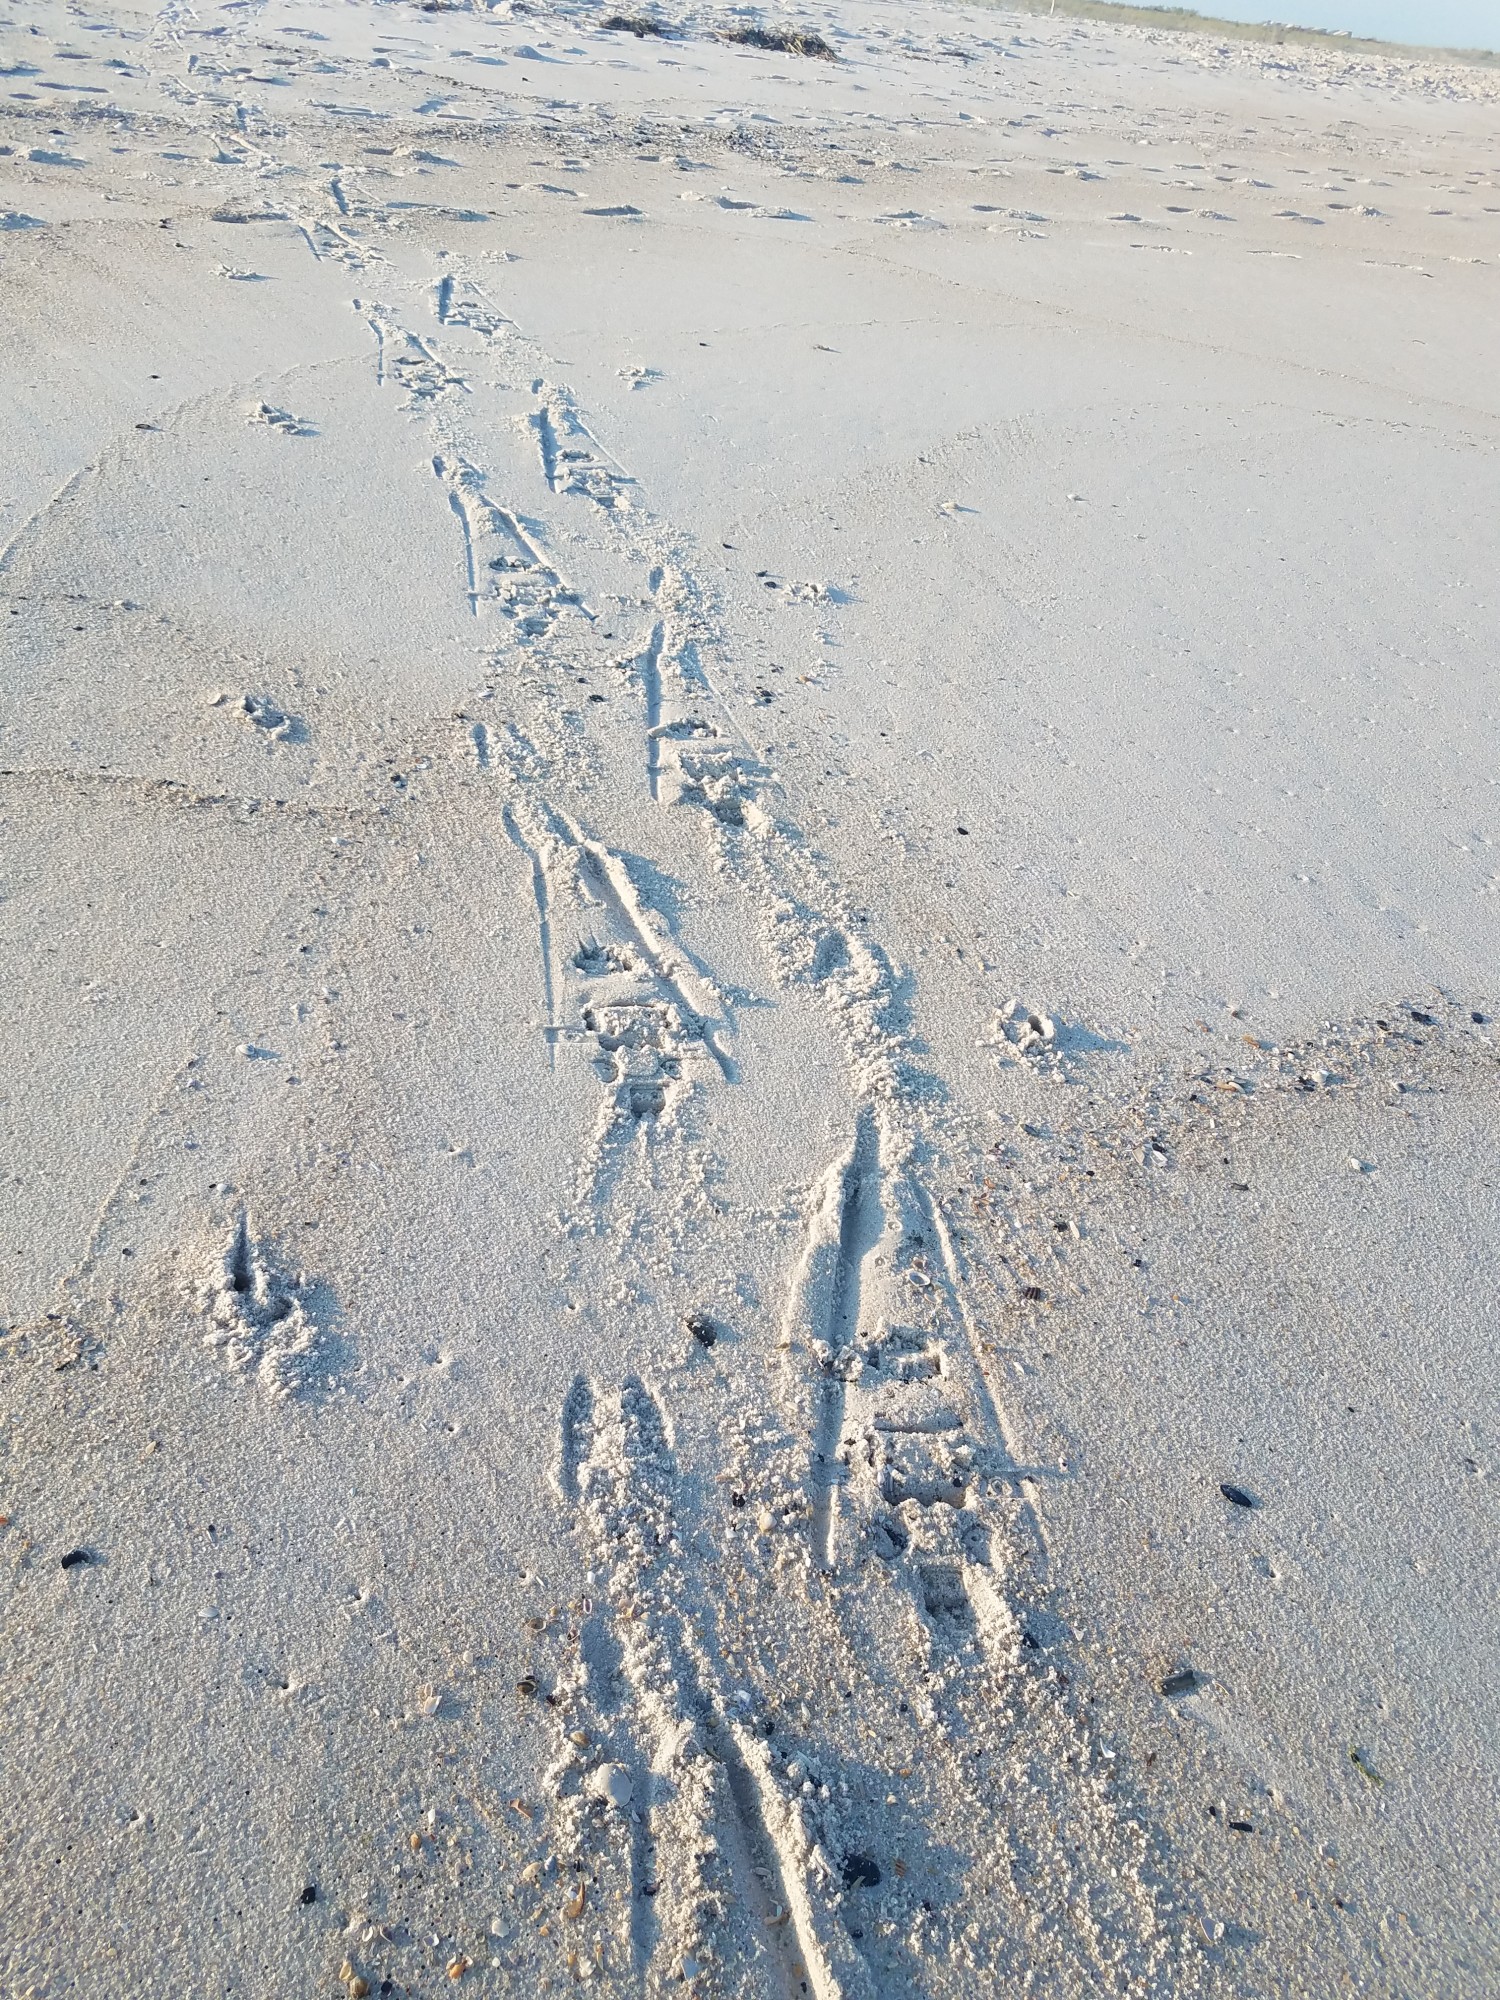 snowshoe tracks in the sand